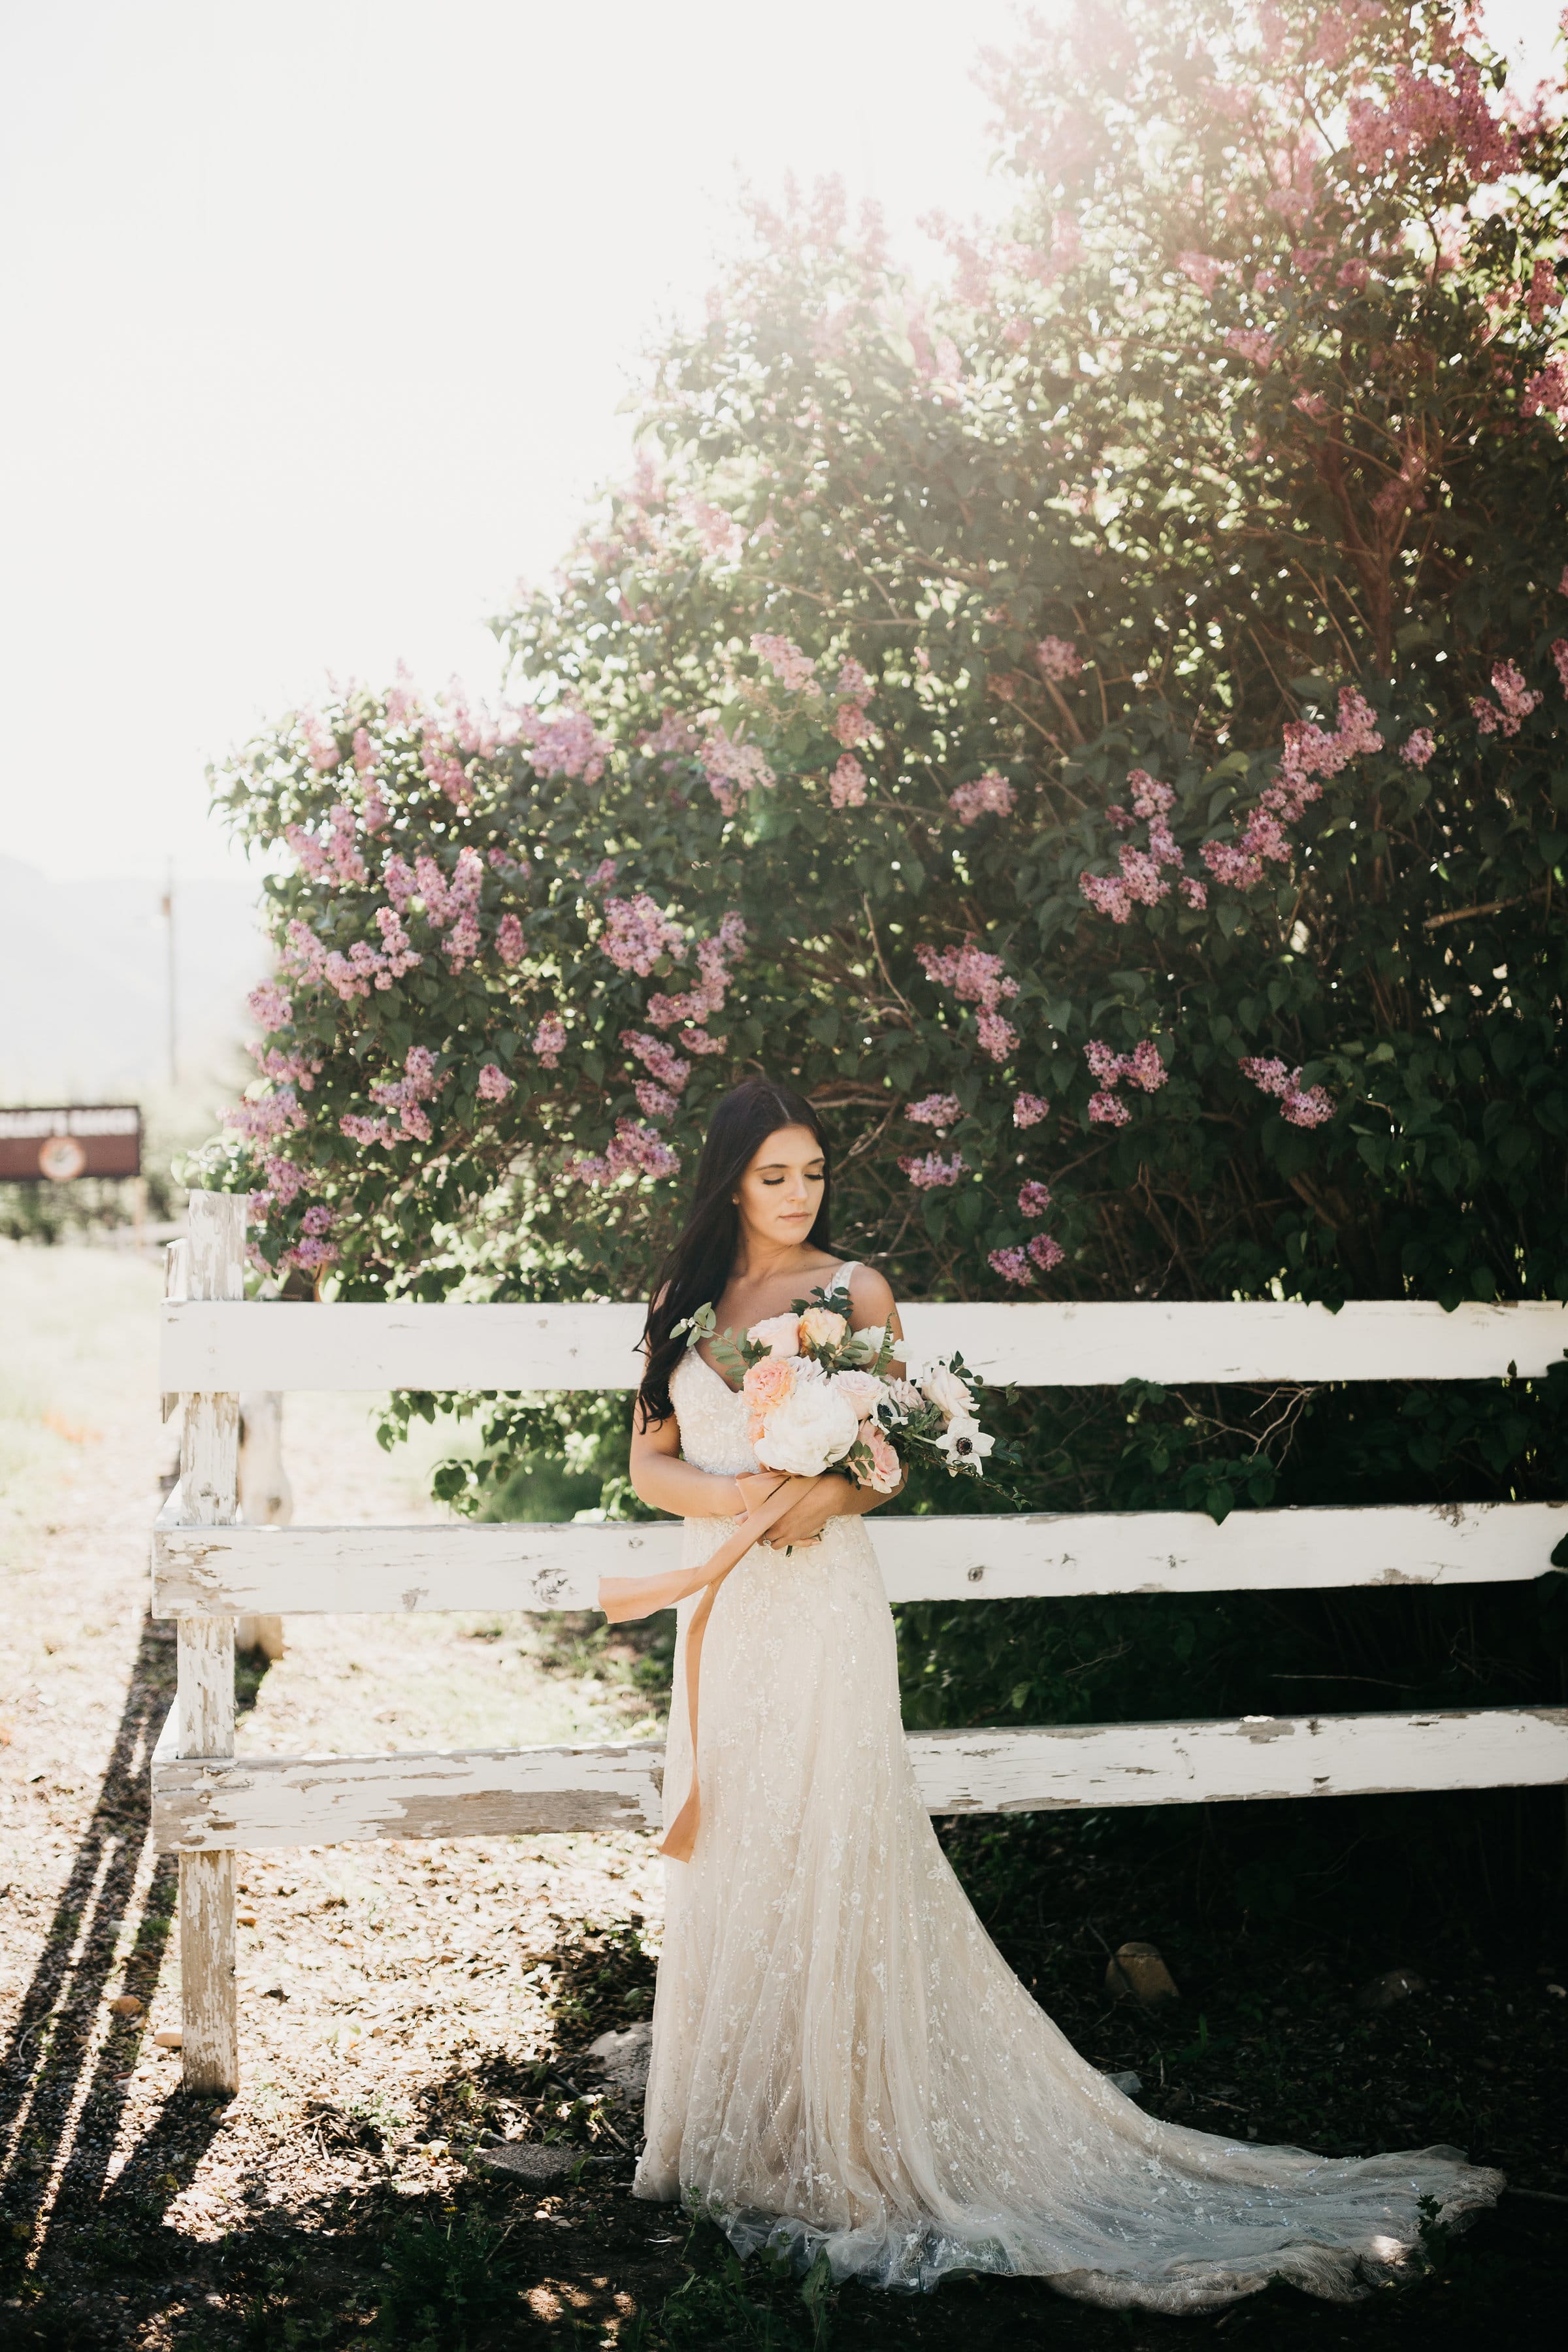 Maggie Sottero's Jorie wedding dress featuring in an Earthy and Romantic Styled Shoot with Breathtaking Florals in Outdoor Wedding